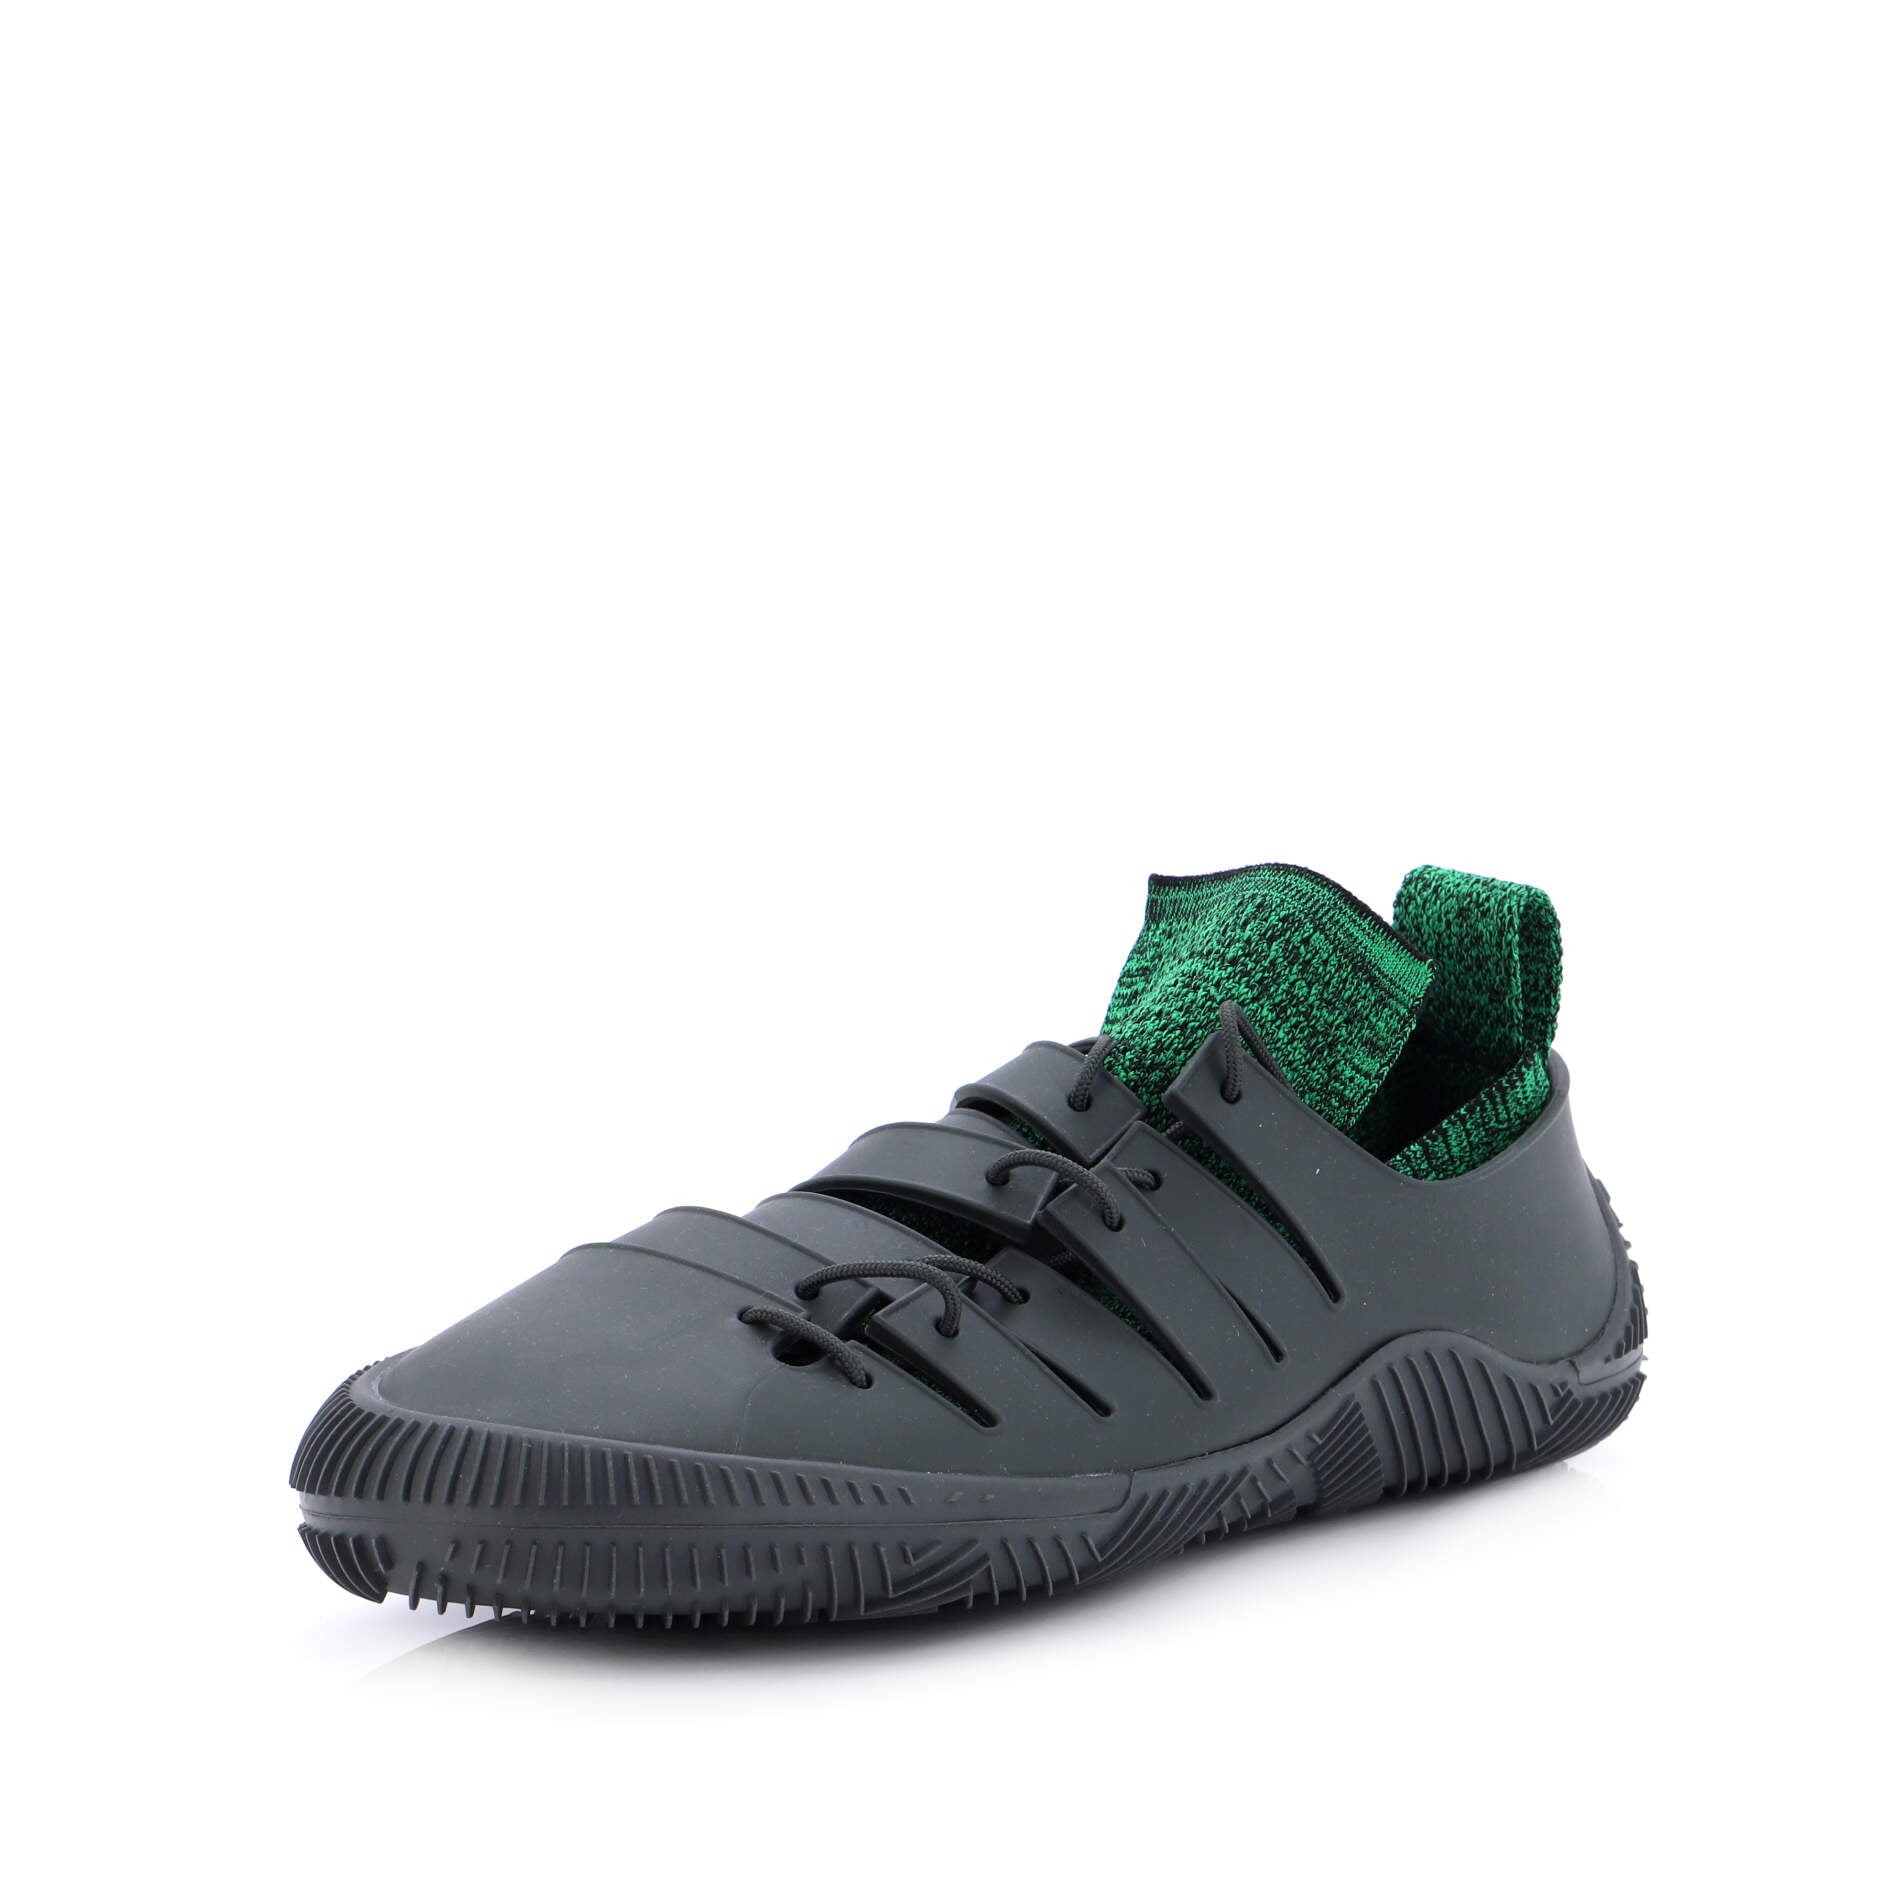 Men's Climber Sneakers Rubber and Fabric